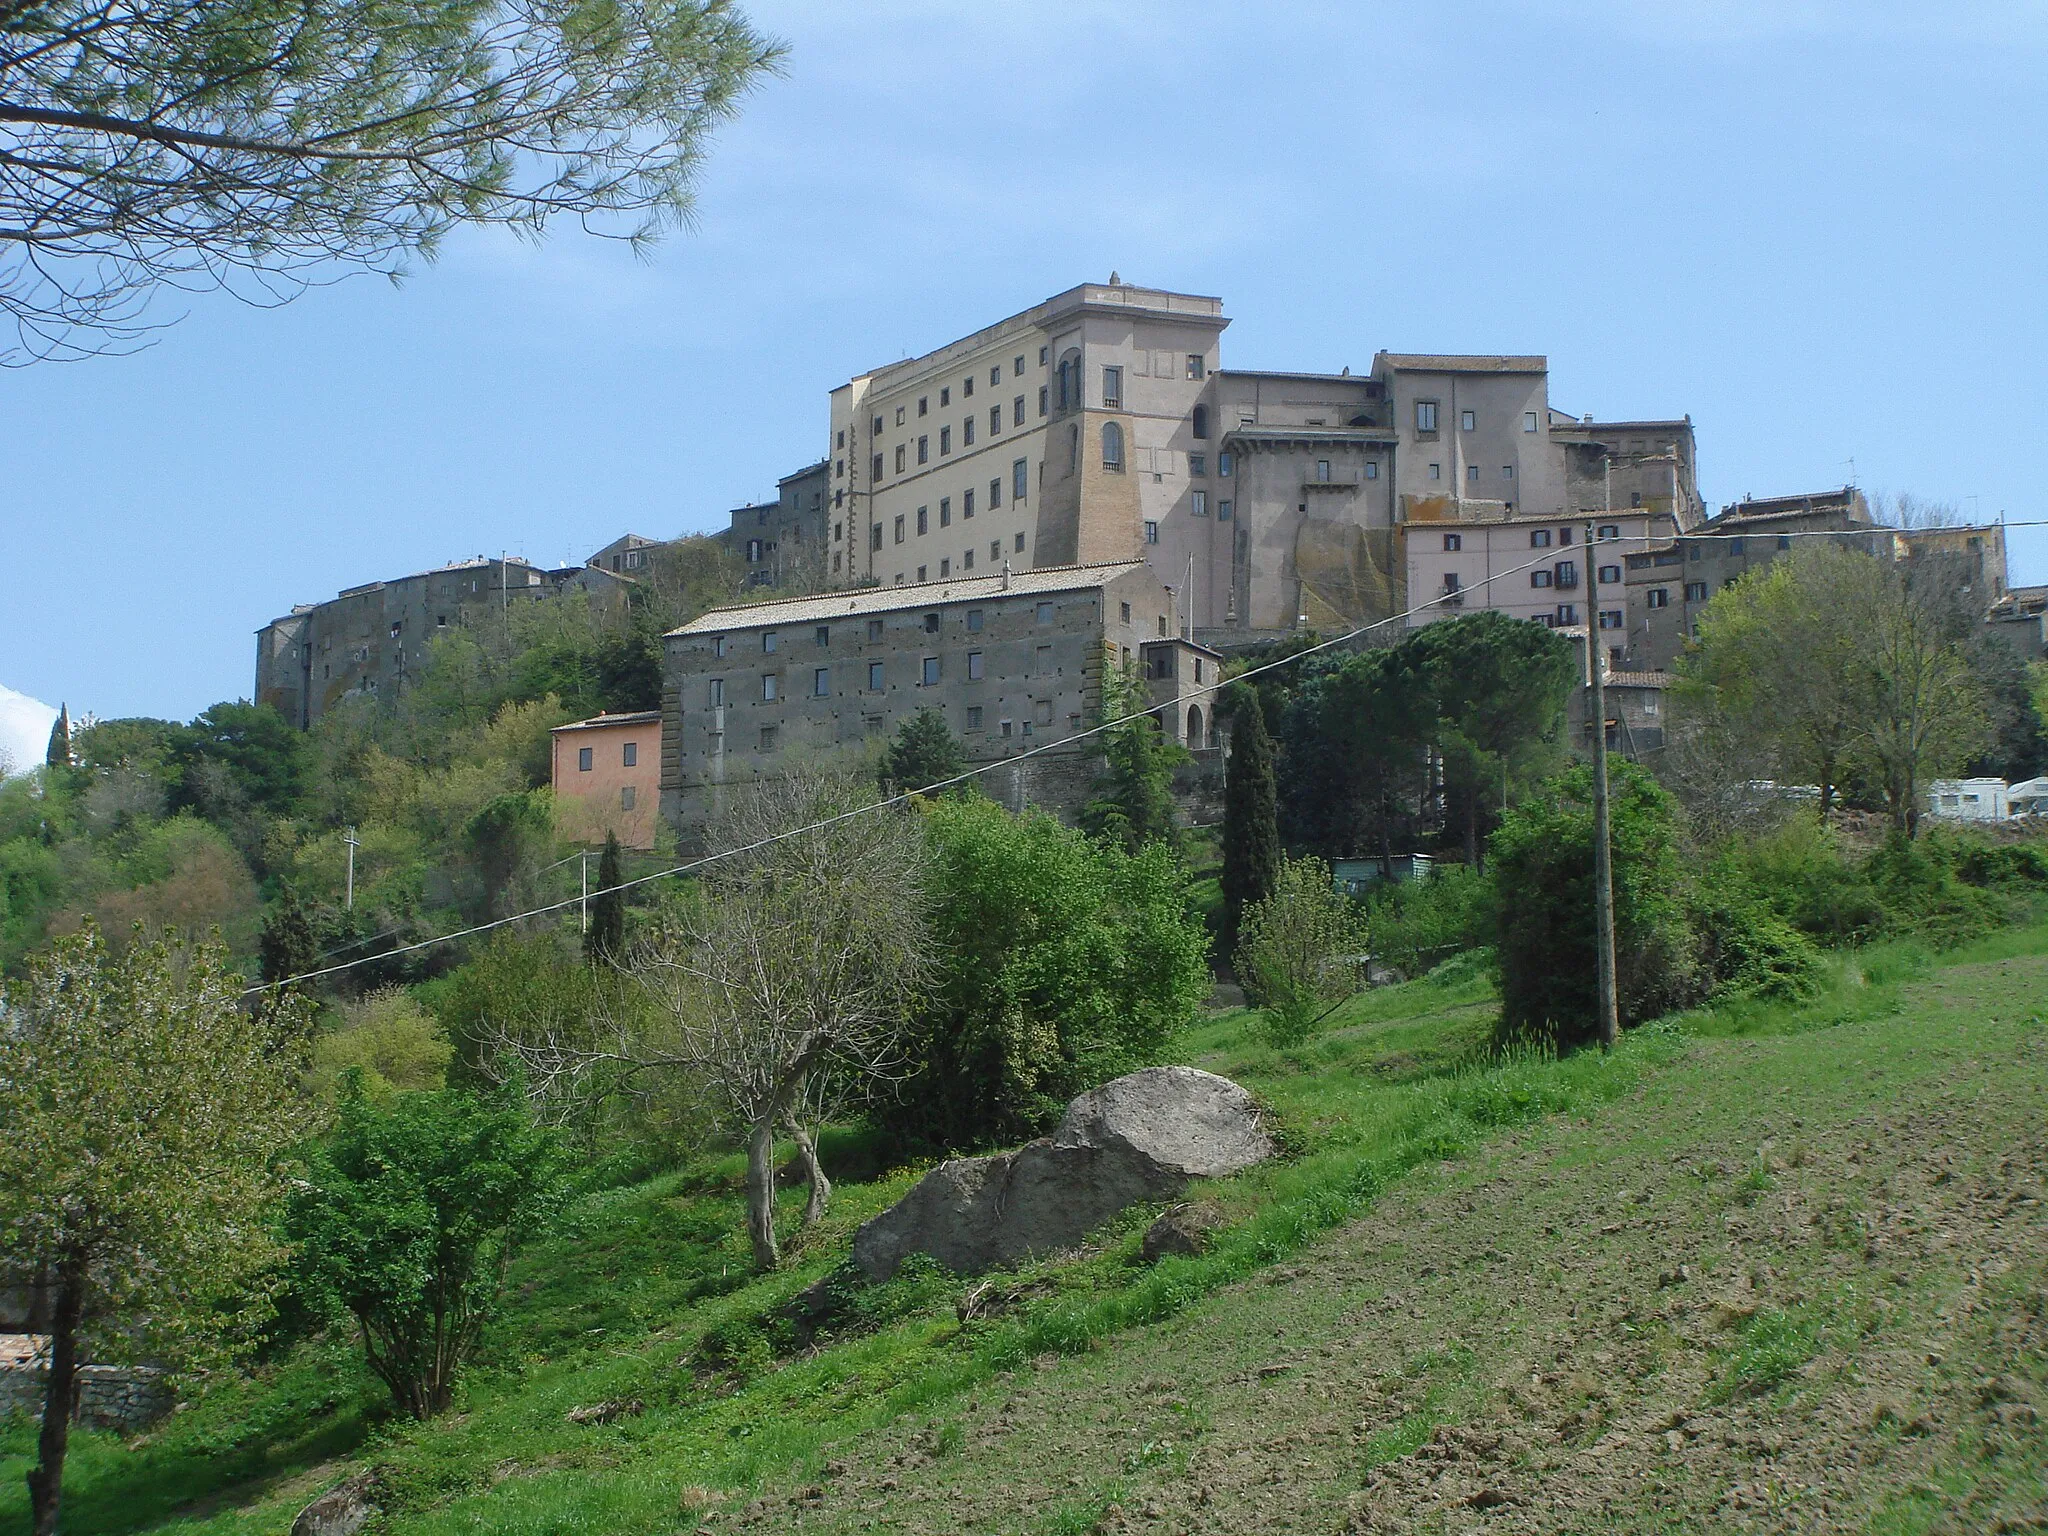 Photo showing: Bomarzo with Palazzo Orsini and part of the old city (left of Palazzo), as seen from the valley West of Bomarzo, on the Road leading to the Parco dei Mostri.